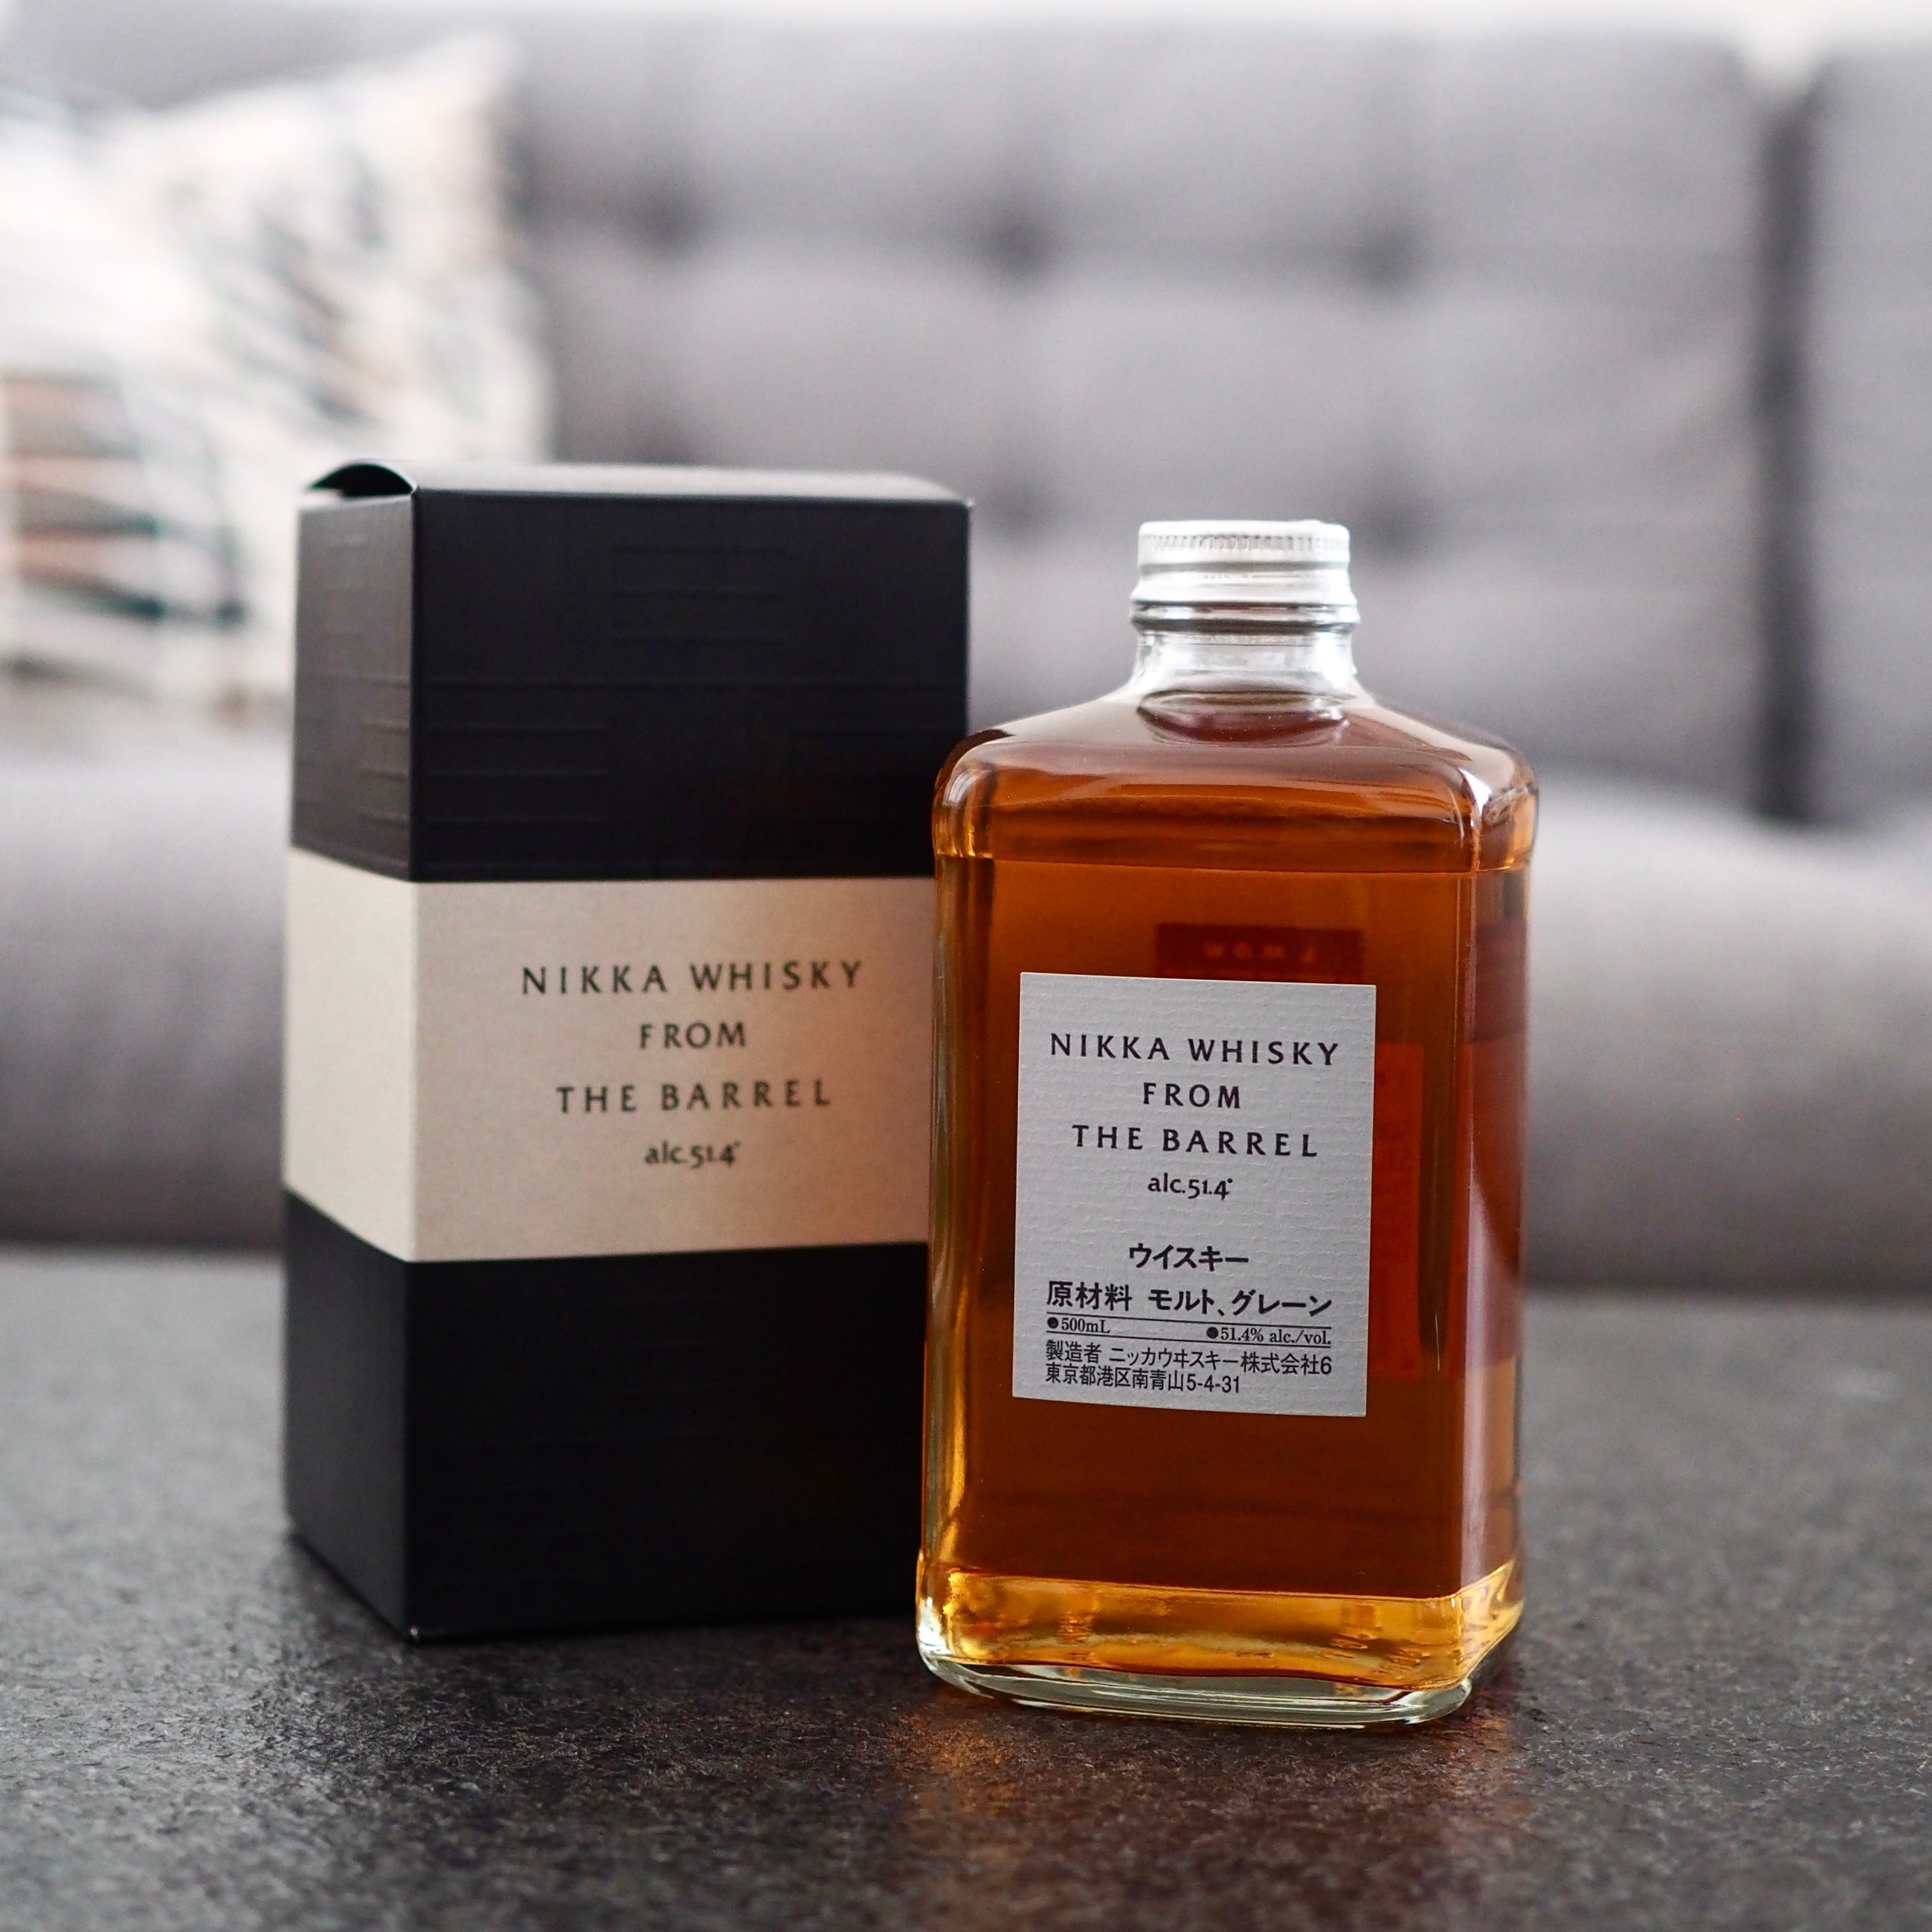 Nikka Whisky From the Barrel 51.4% ABV - Possibly the best